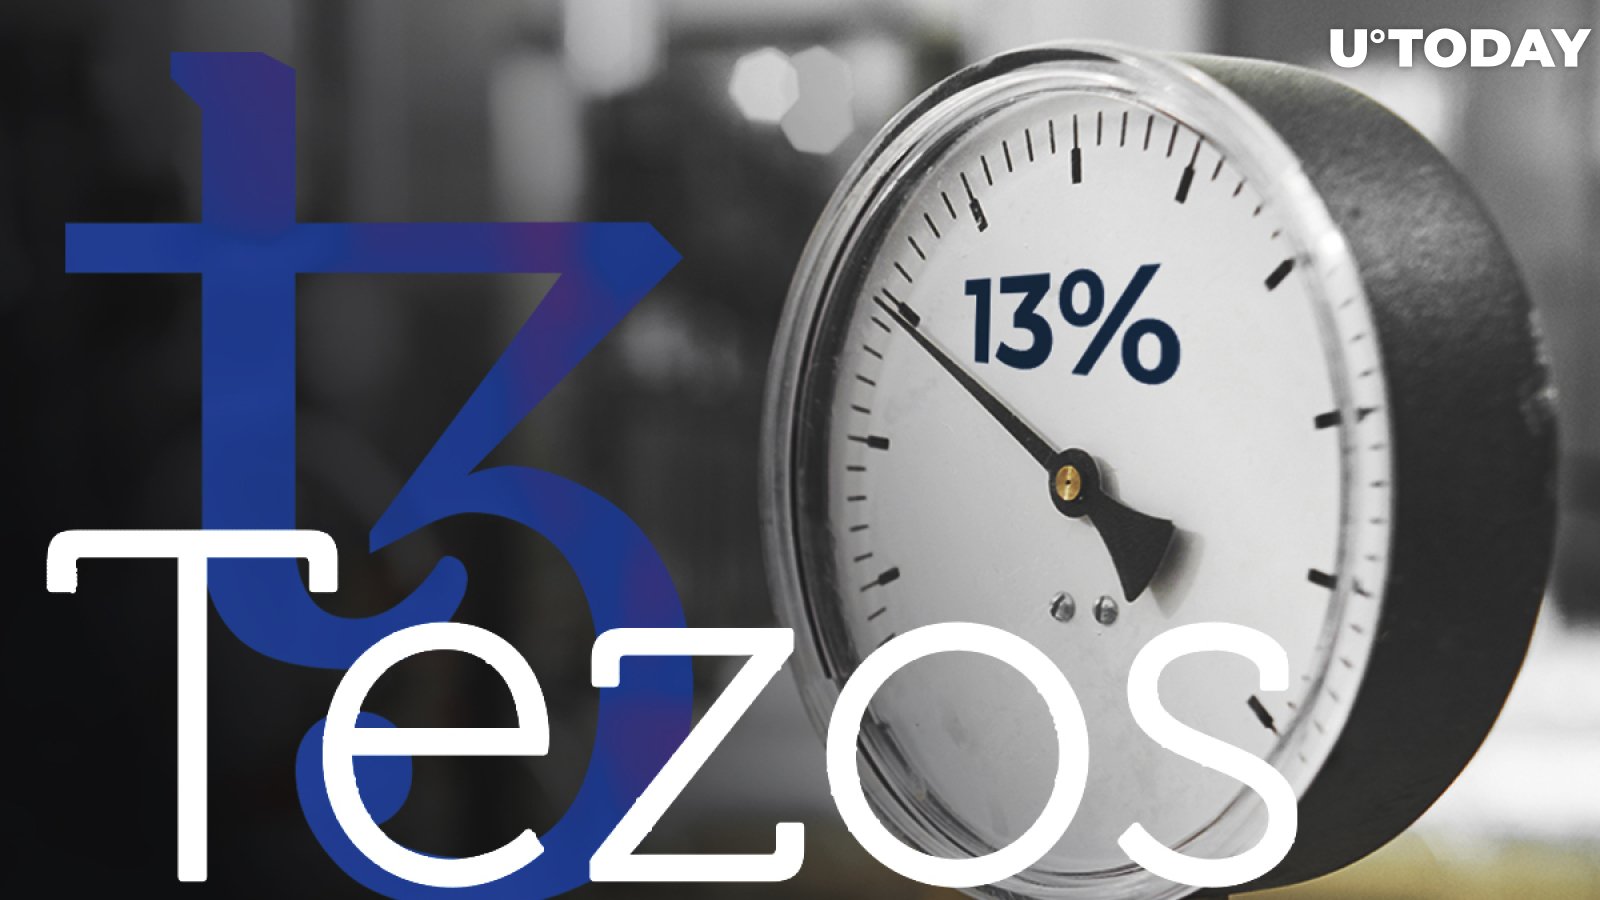 Tezos (XTZ) Keeps Pumping 13%, Sits Firm in Top Ten – Crypto Experts Respond